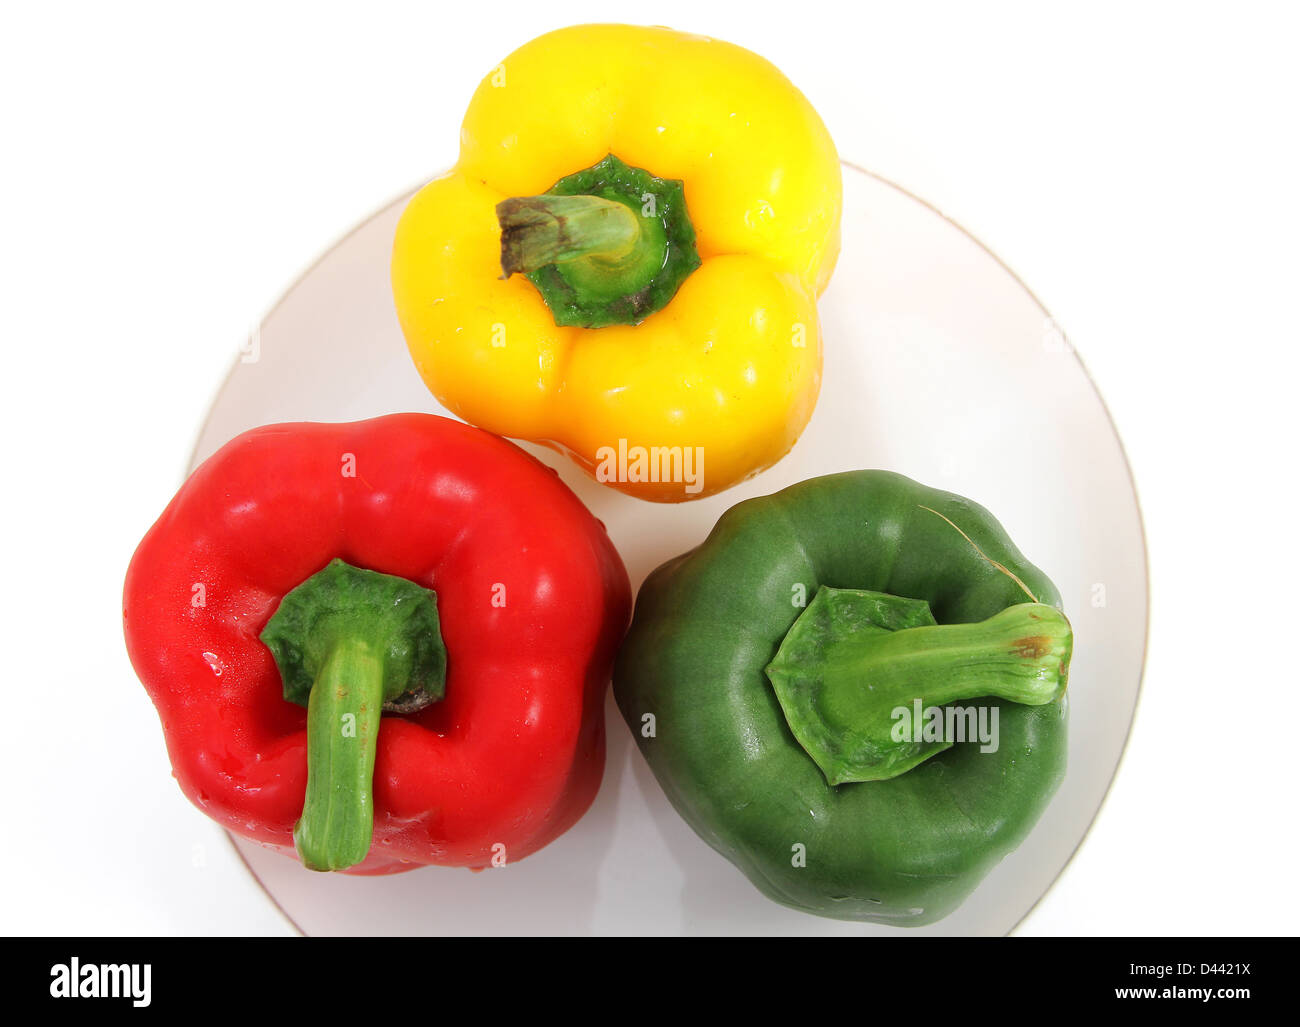 Closeup image of fresh pepper green red and yellow on plate and white background Stock Photo